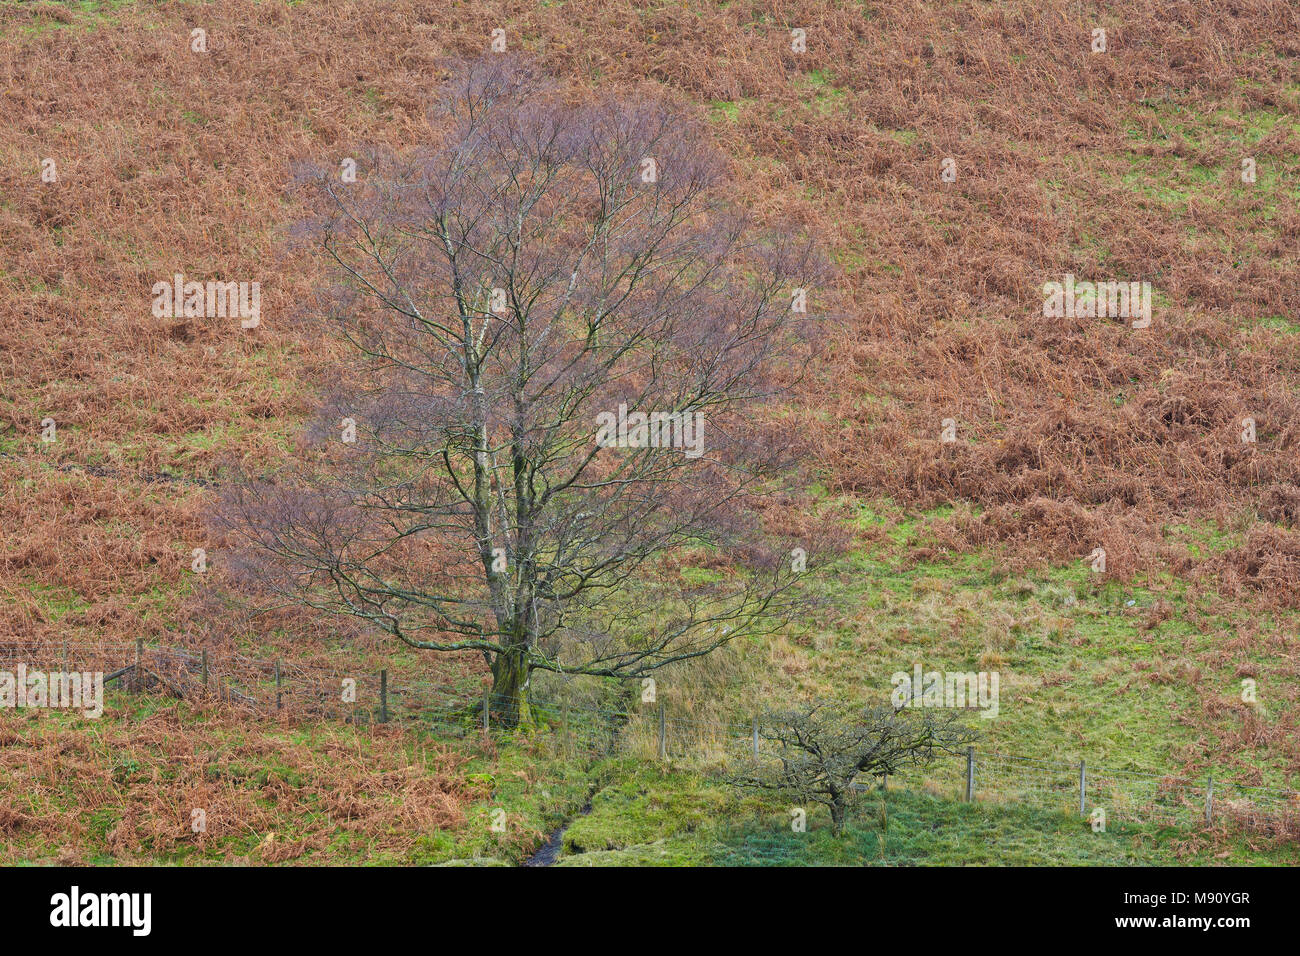 Single tree in a field with a hill full of bracken in the background, England, UK Stock Photo